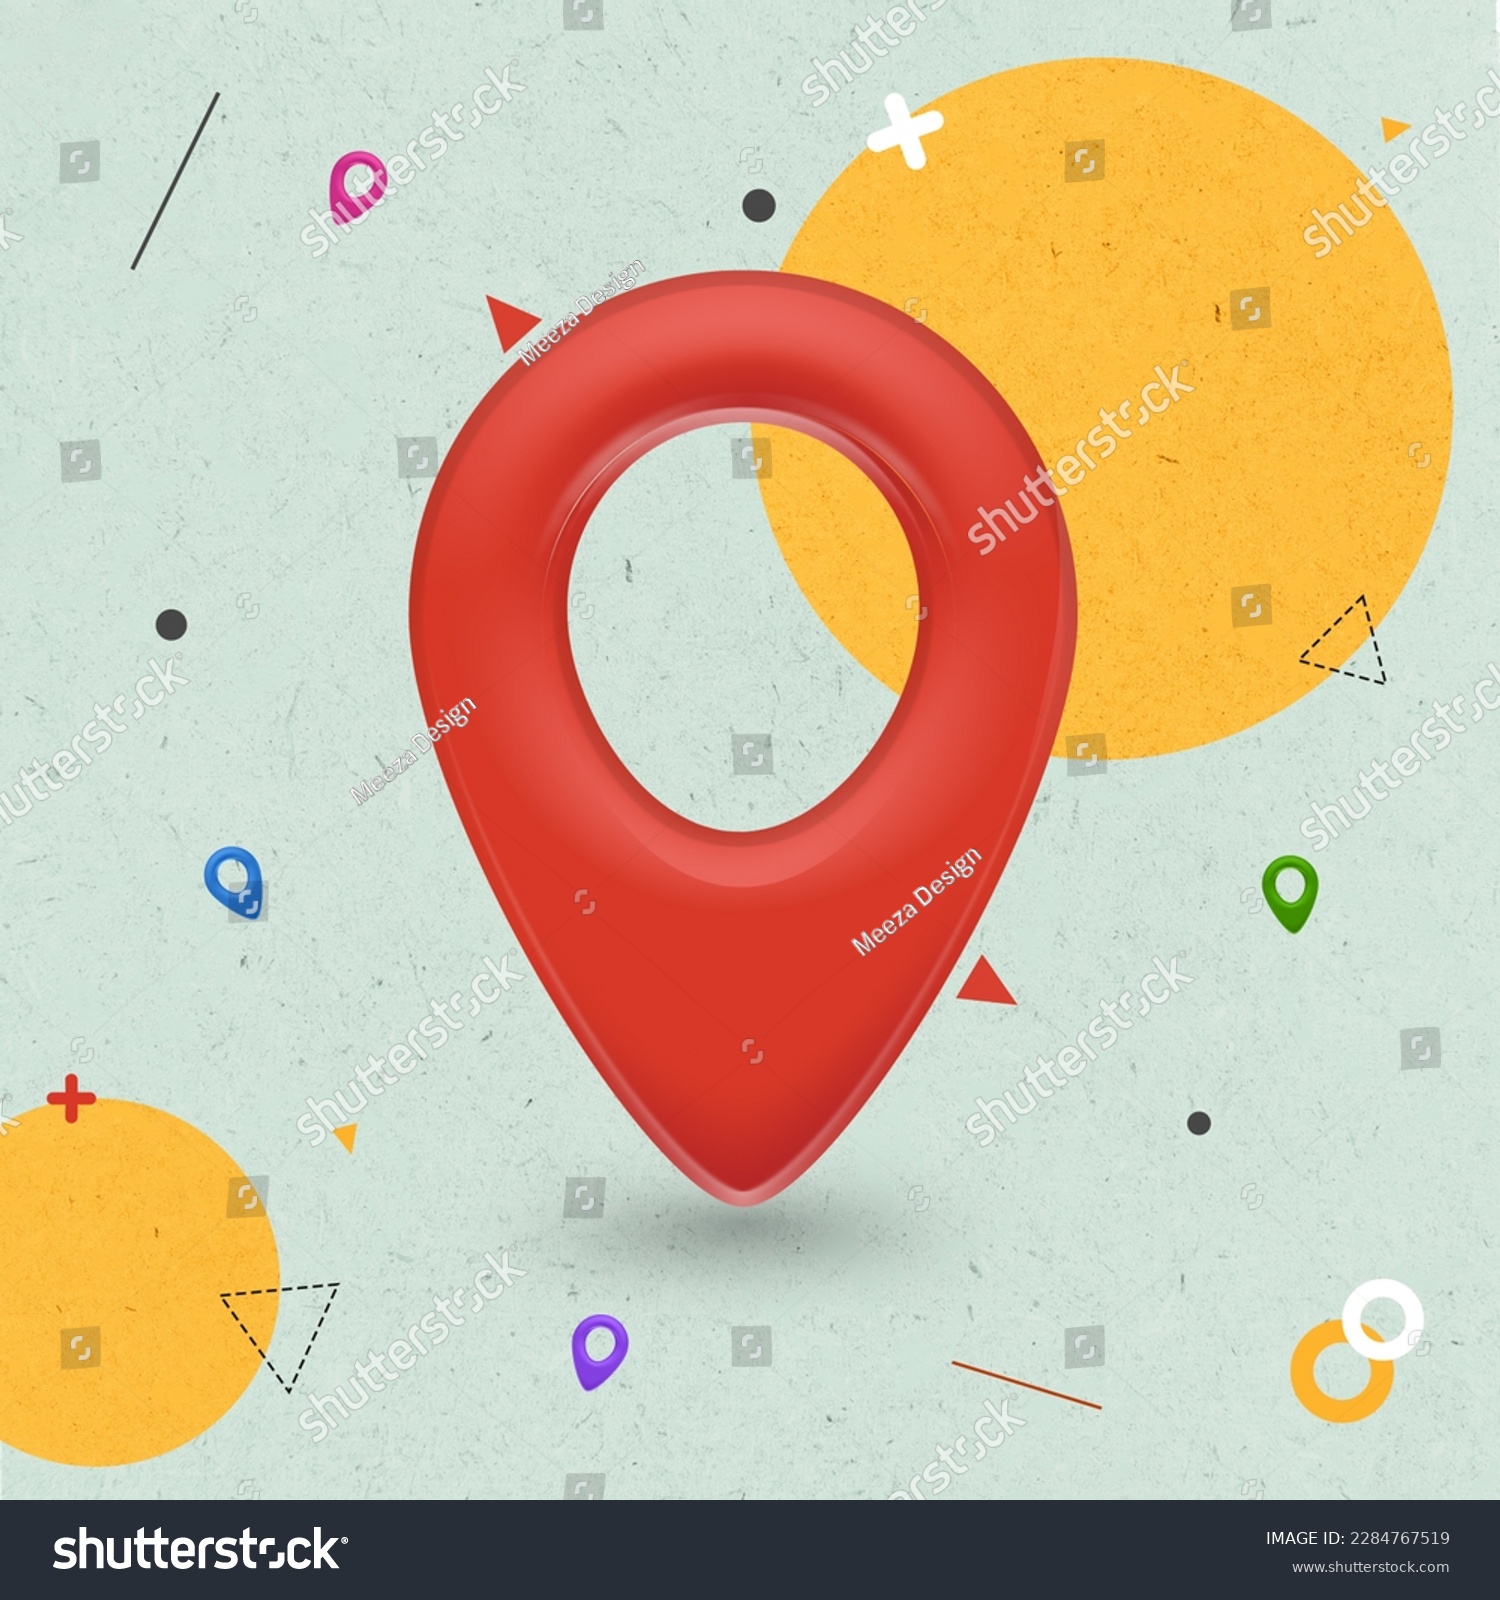 Artwork of location symbol element isolated on painting background #2284767519